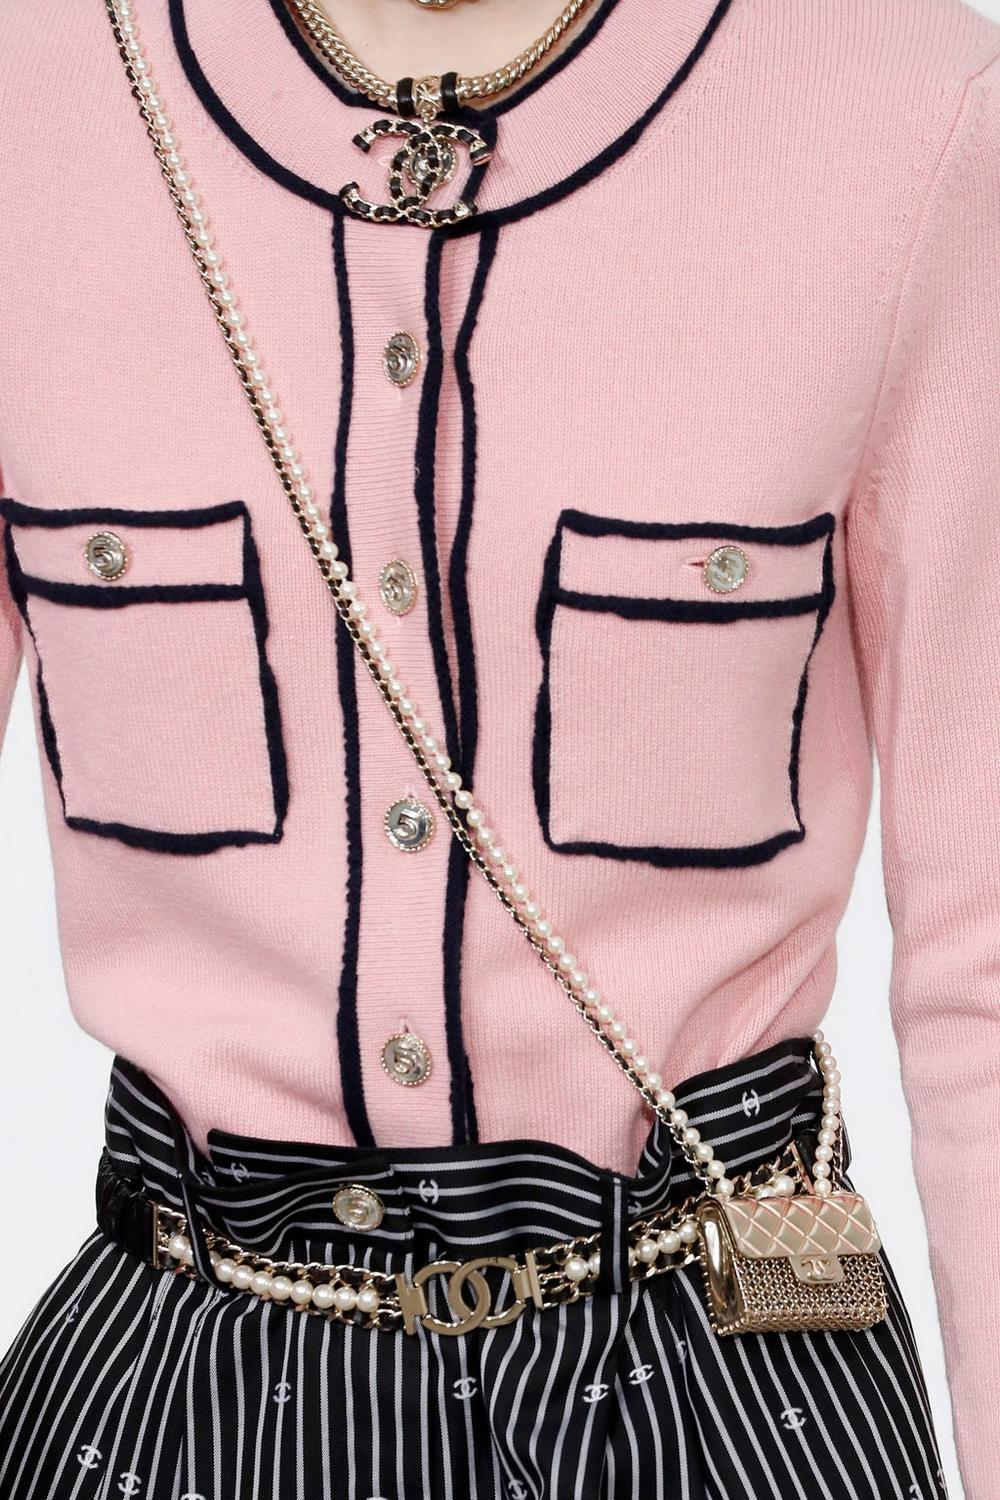 Oh-so-dainty: Chanel has brought us the world's cutest mini bags